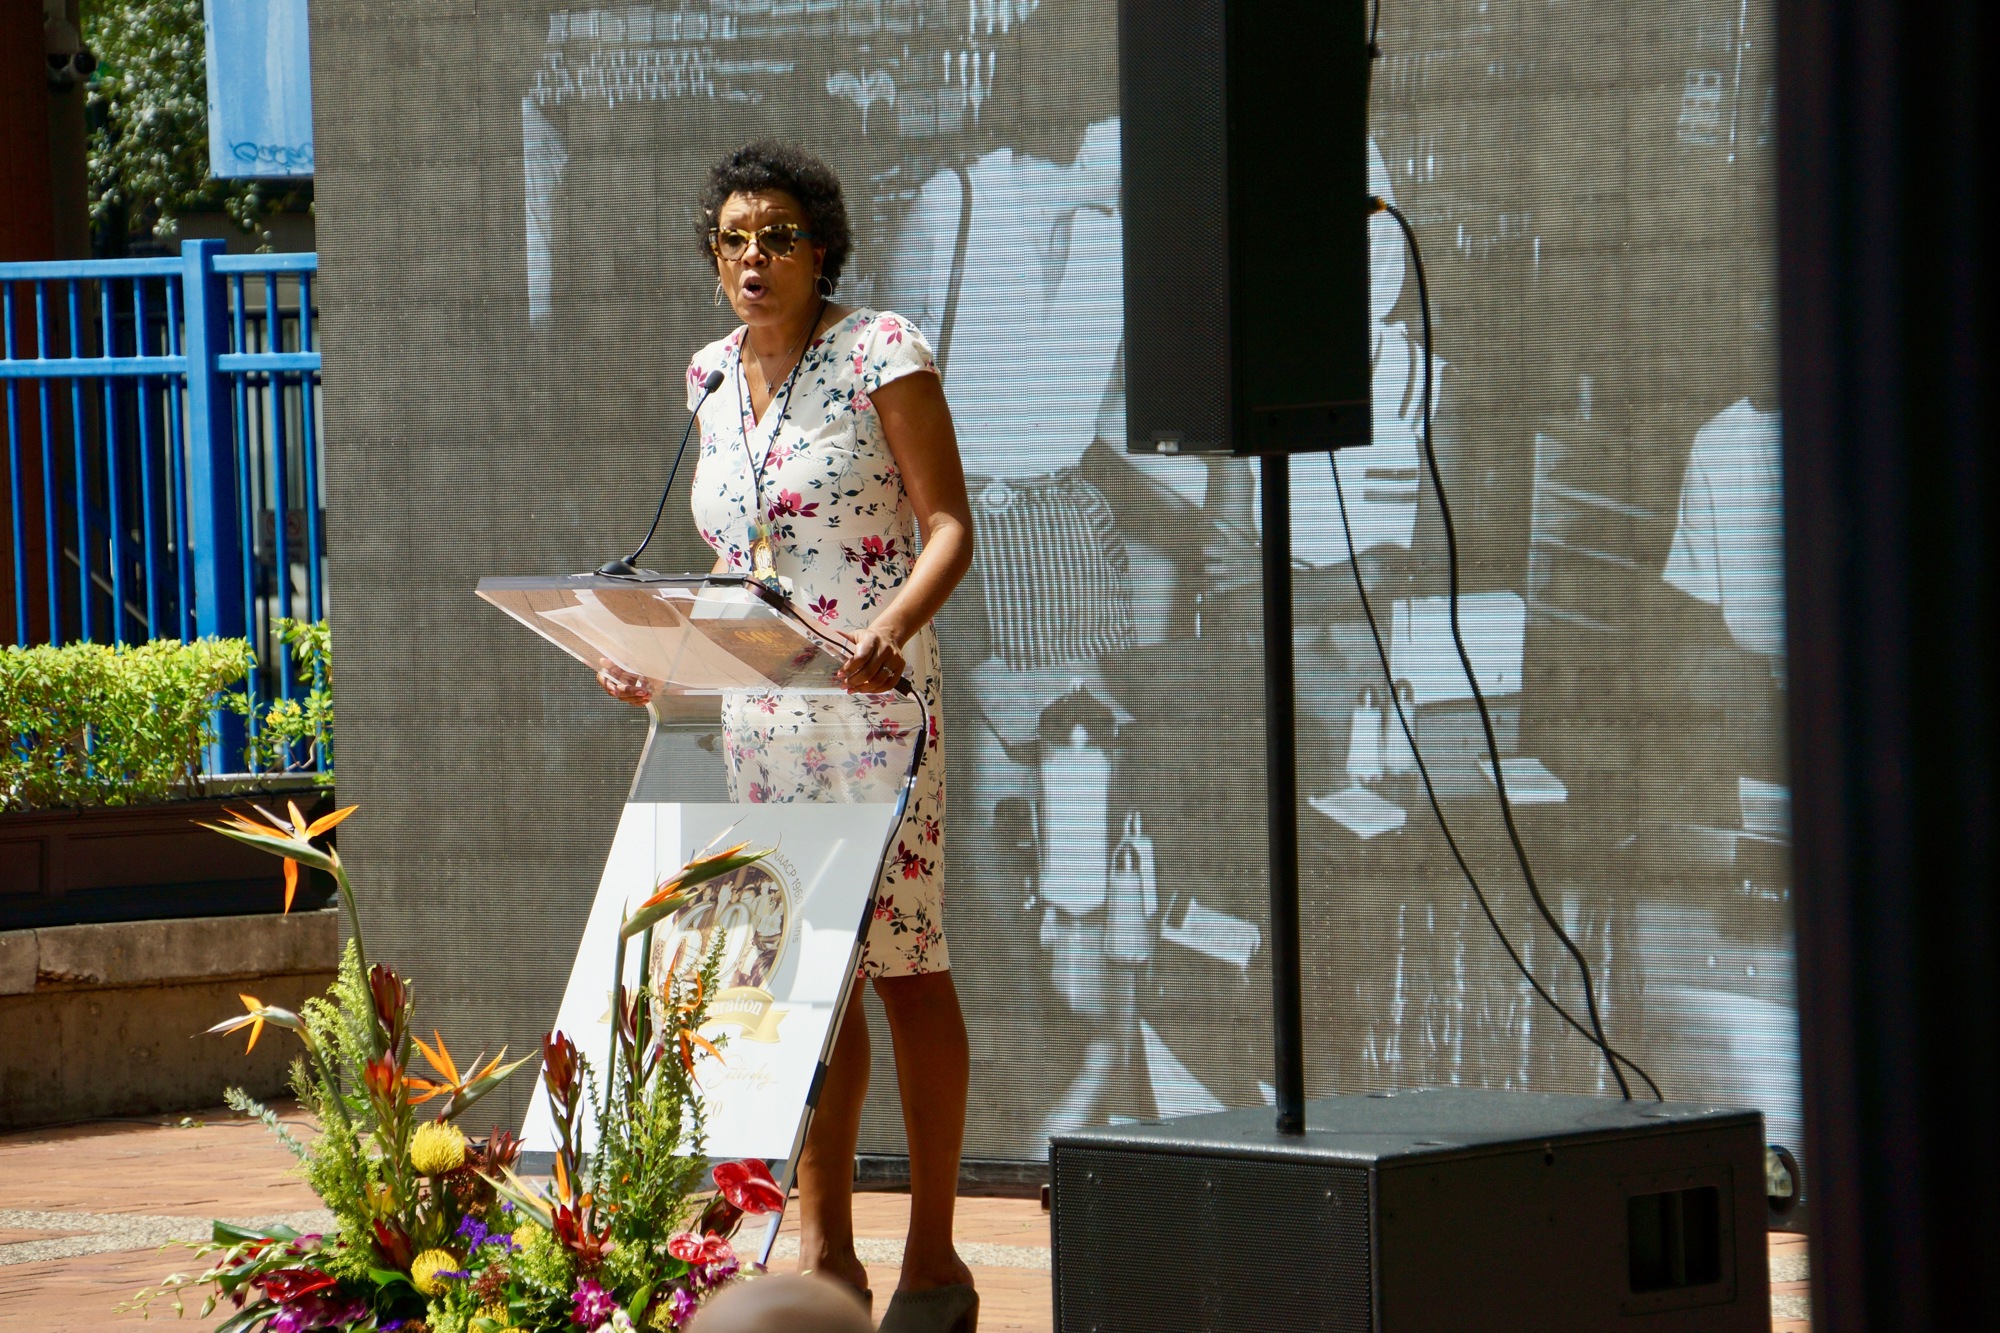 City Council member Brenda Priestly Jackson,  a niece of Hurst, speaks at the commemoration. (Photo by Katie Garwood)